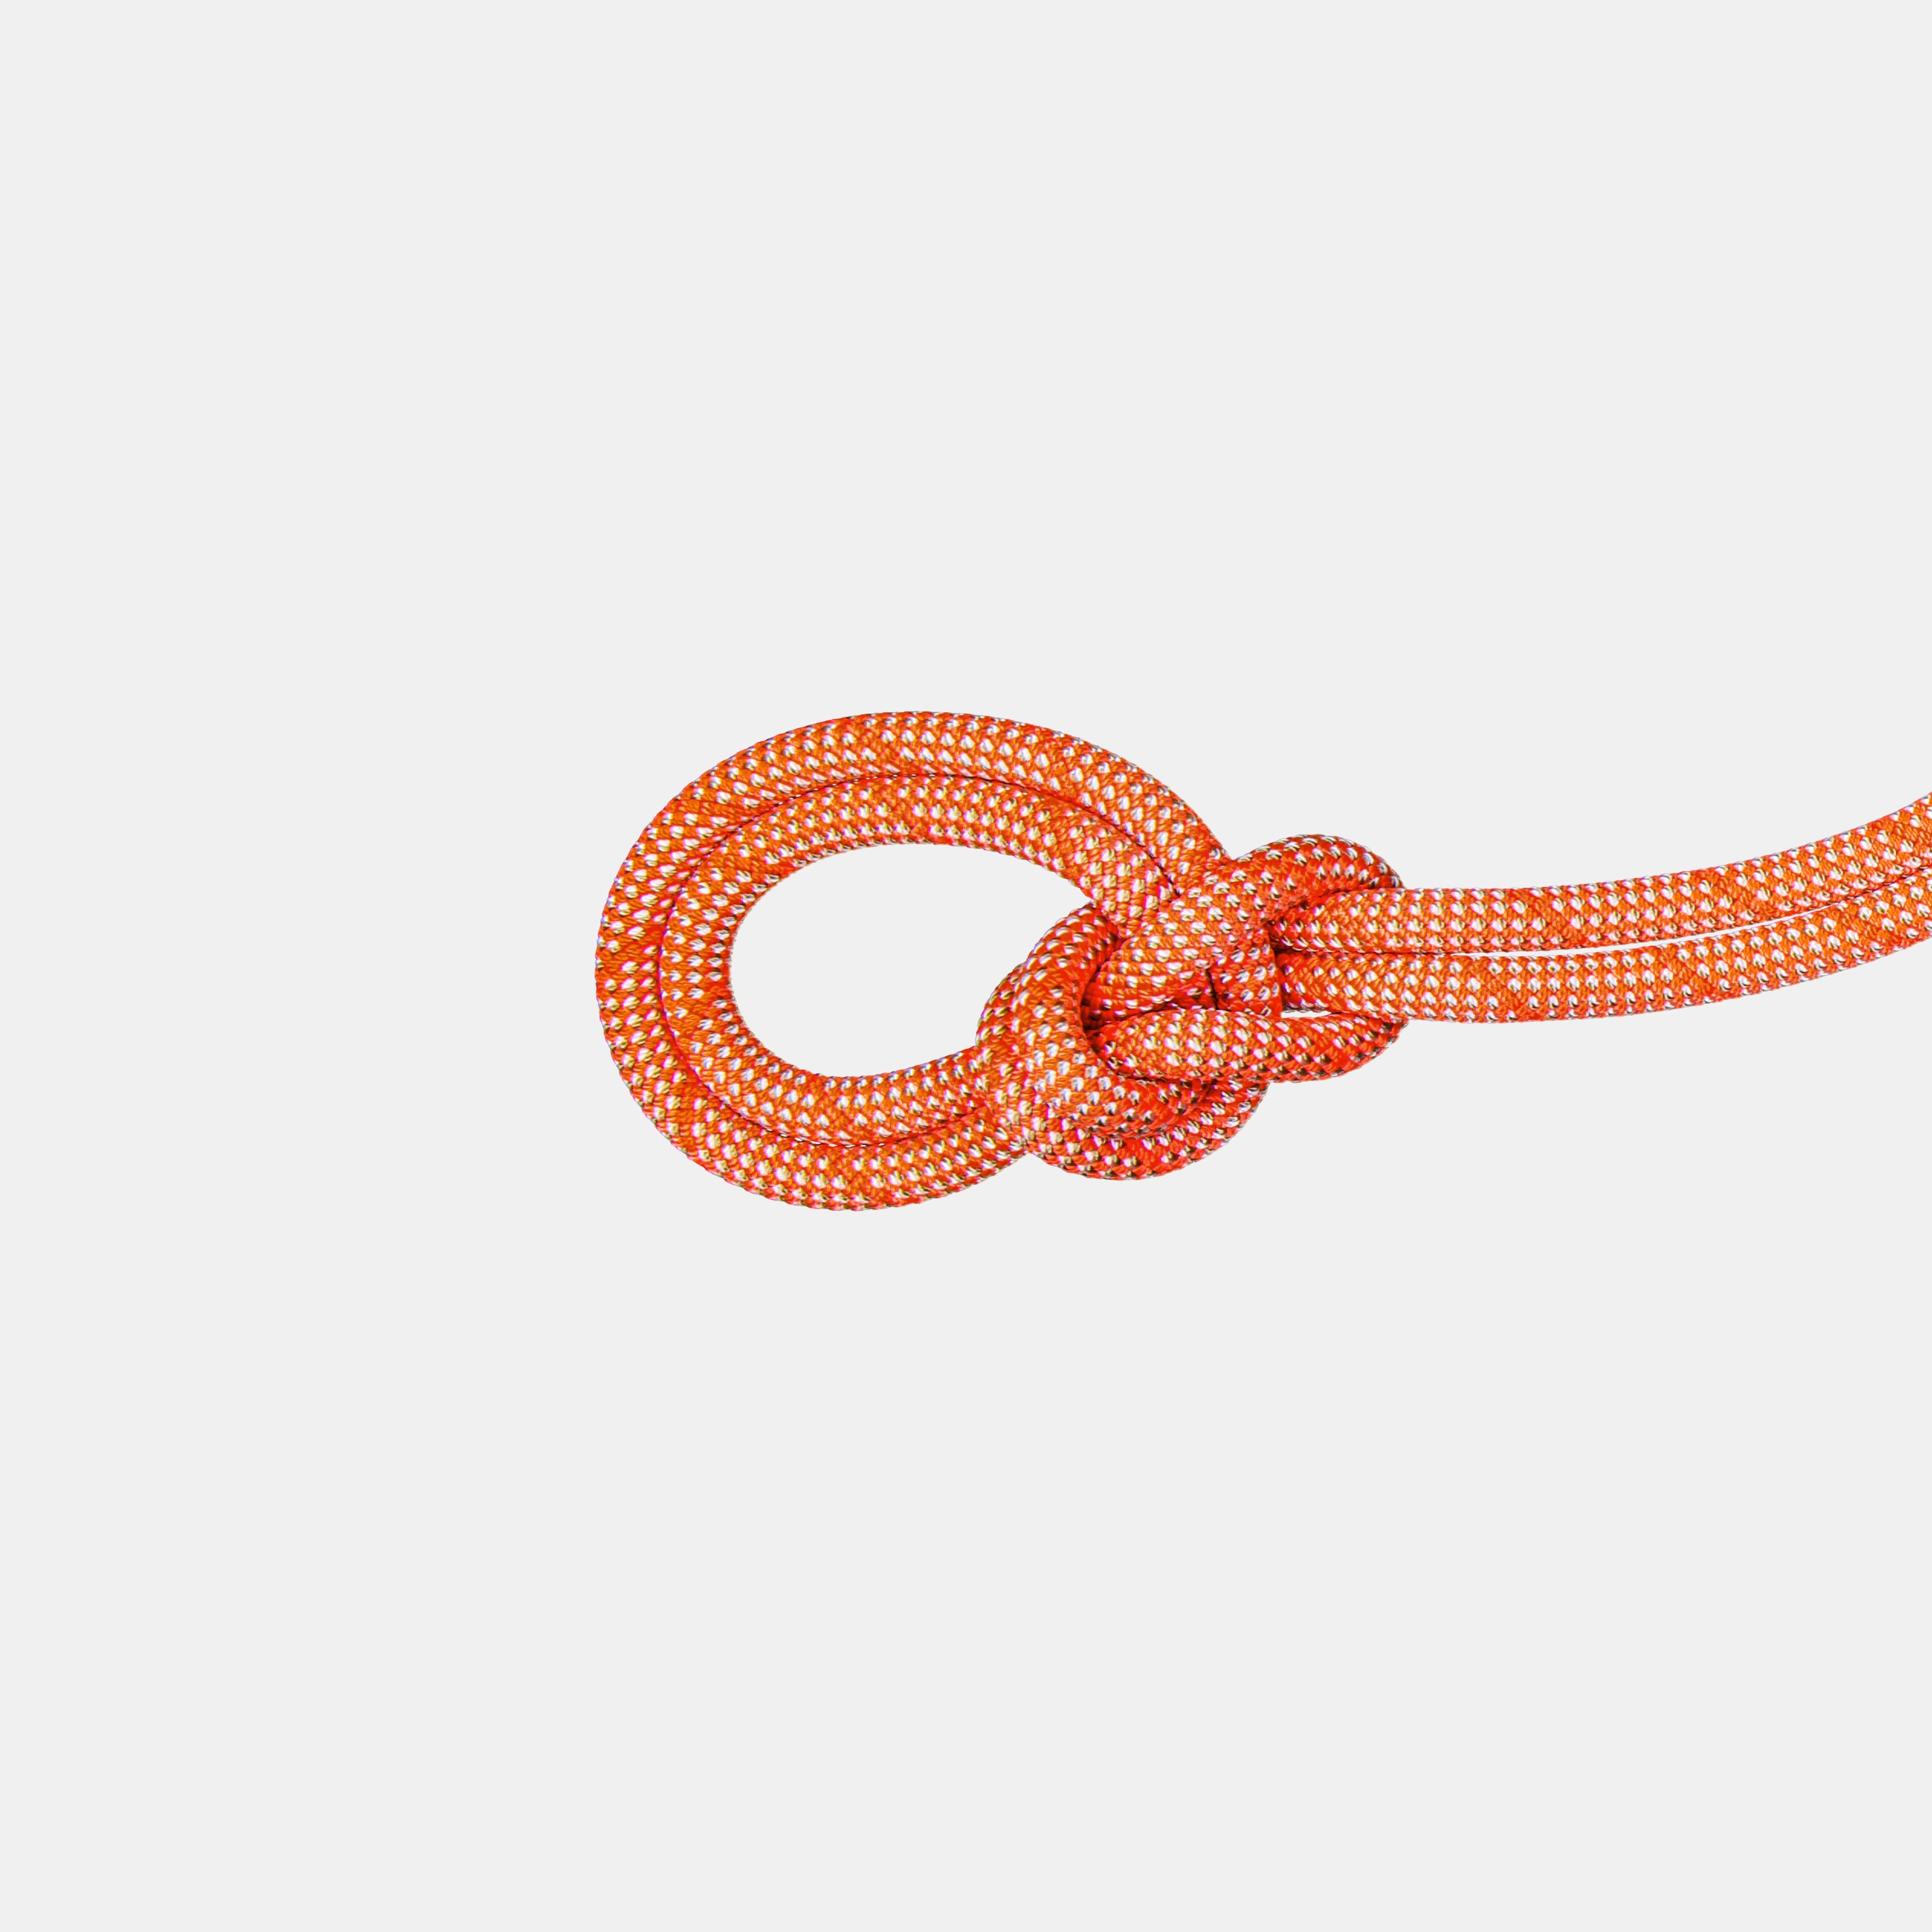 9.8 Crag Classic Rope product image